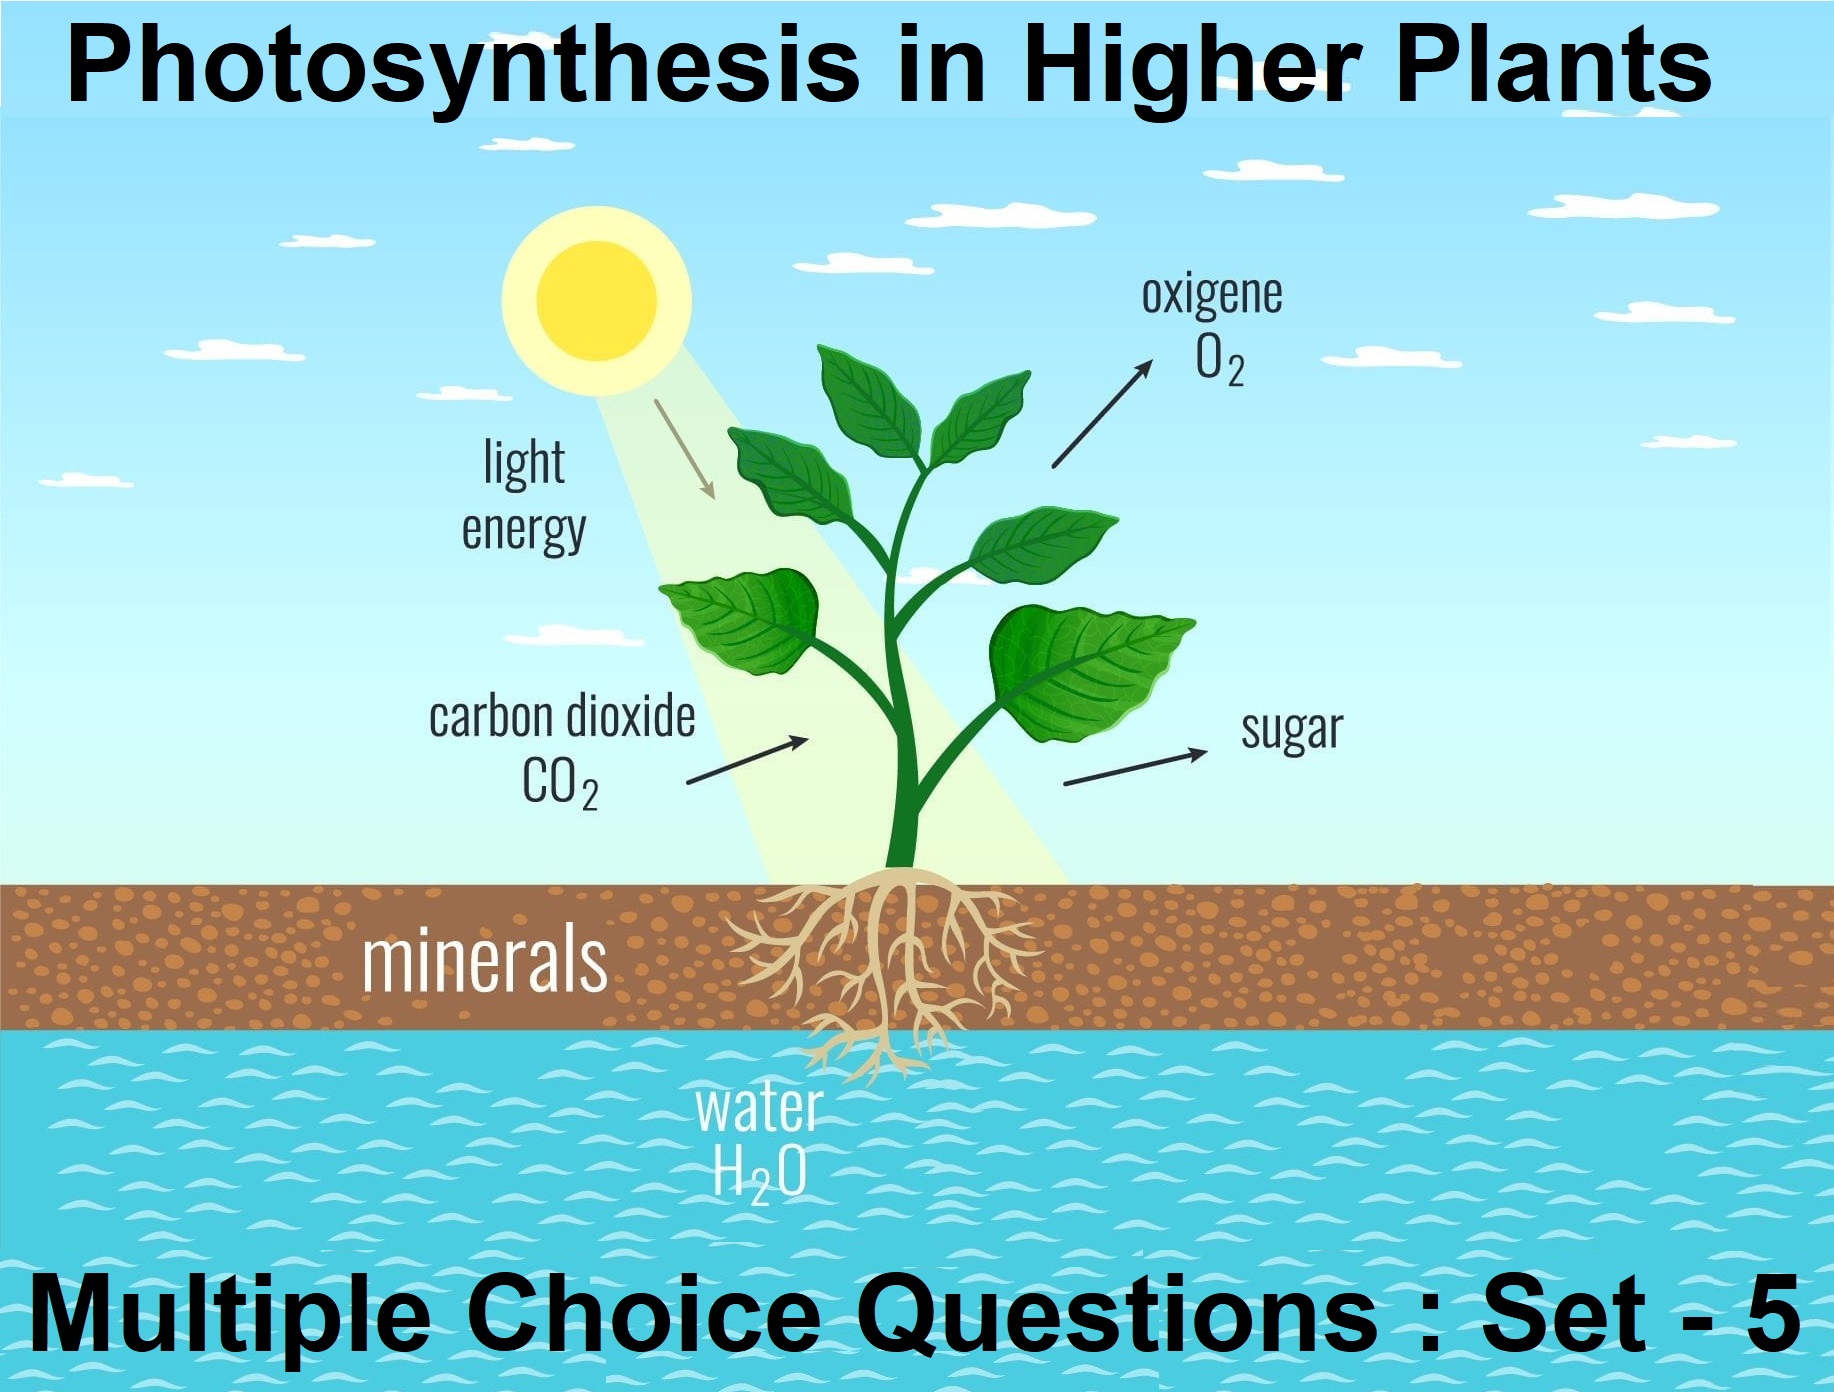 Biology Photosynthesis in Higher Plants-5